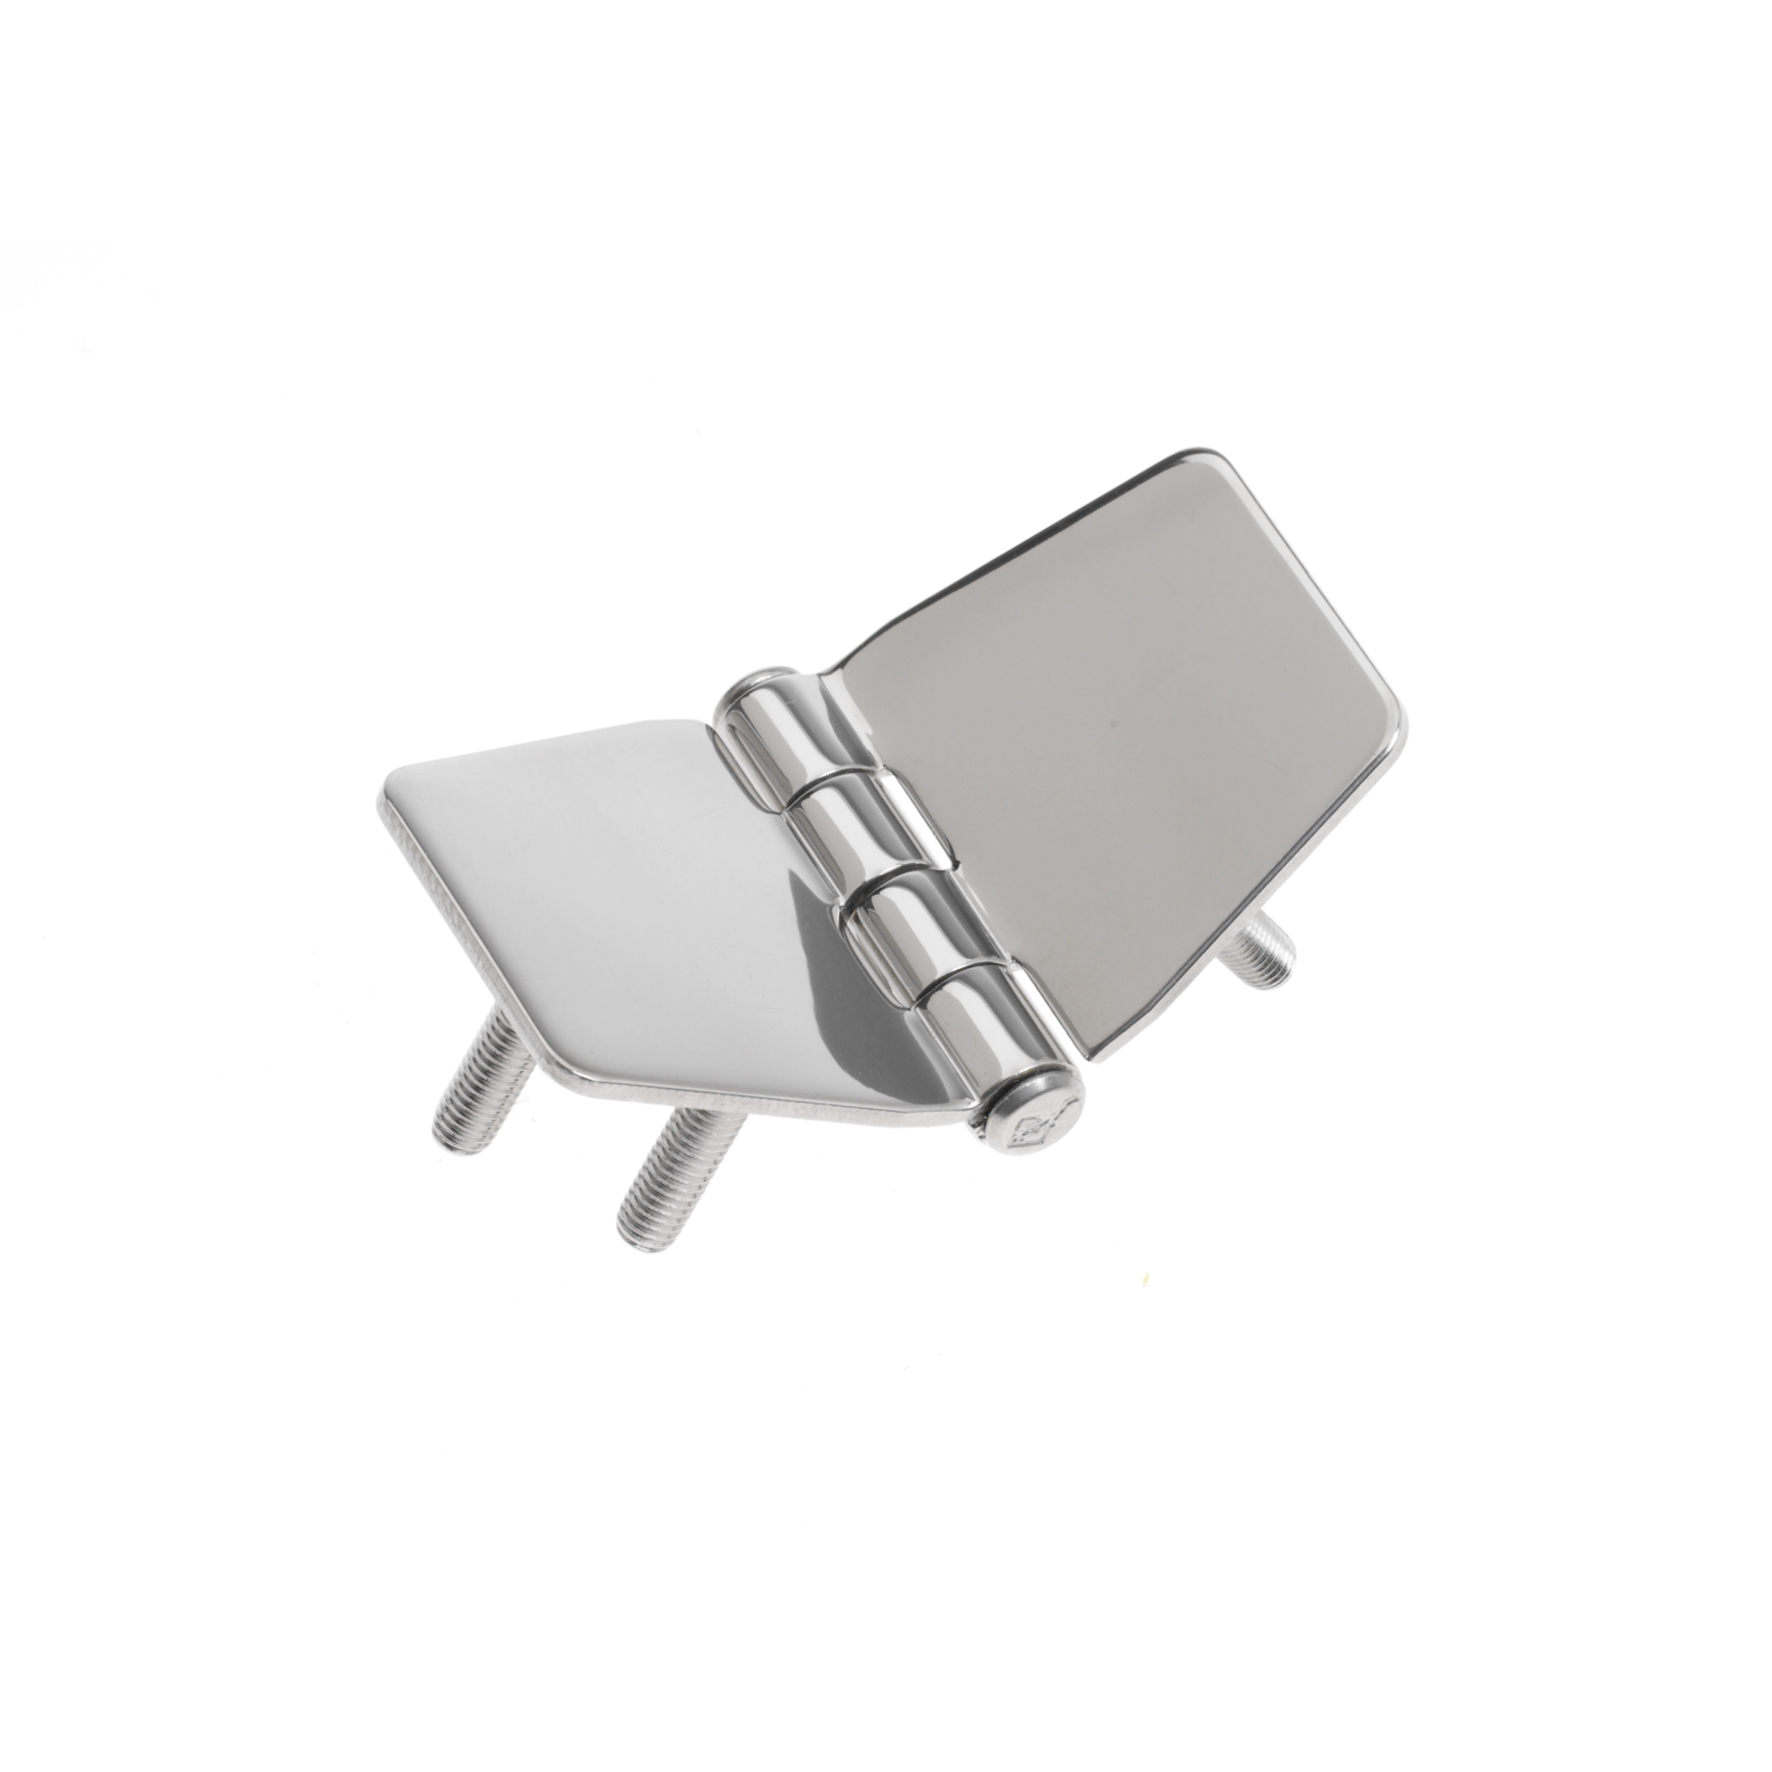 Edson Marine: Stainless Steel Hinge (960-A-2097)